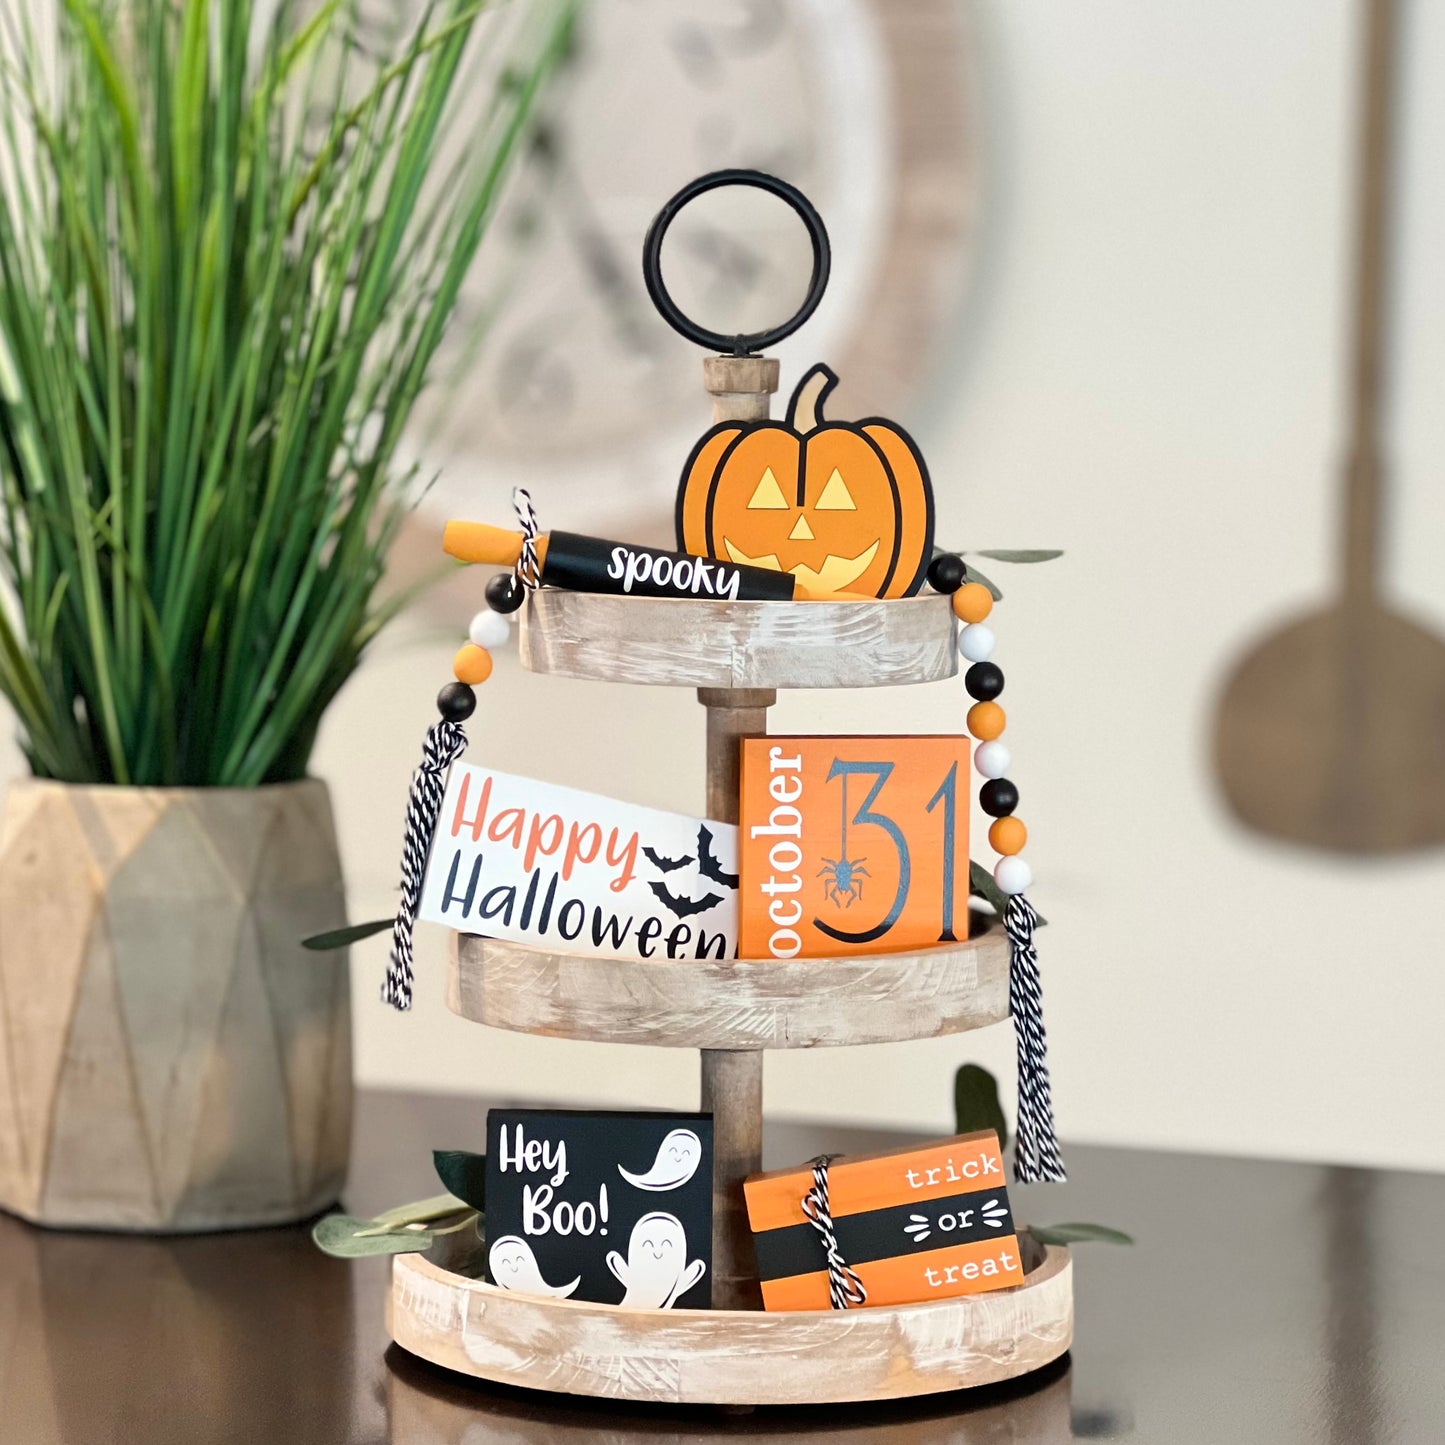 Classic Halloween Themed Tiered Tray Decor Bundle